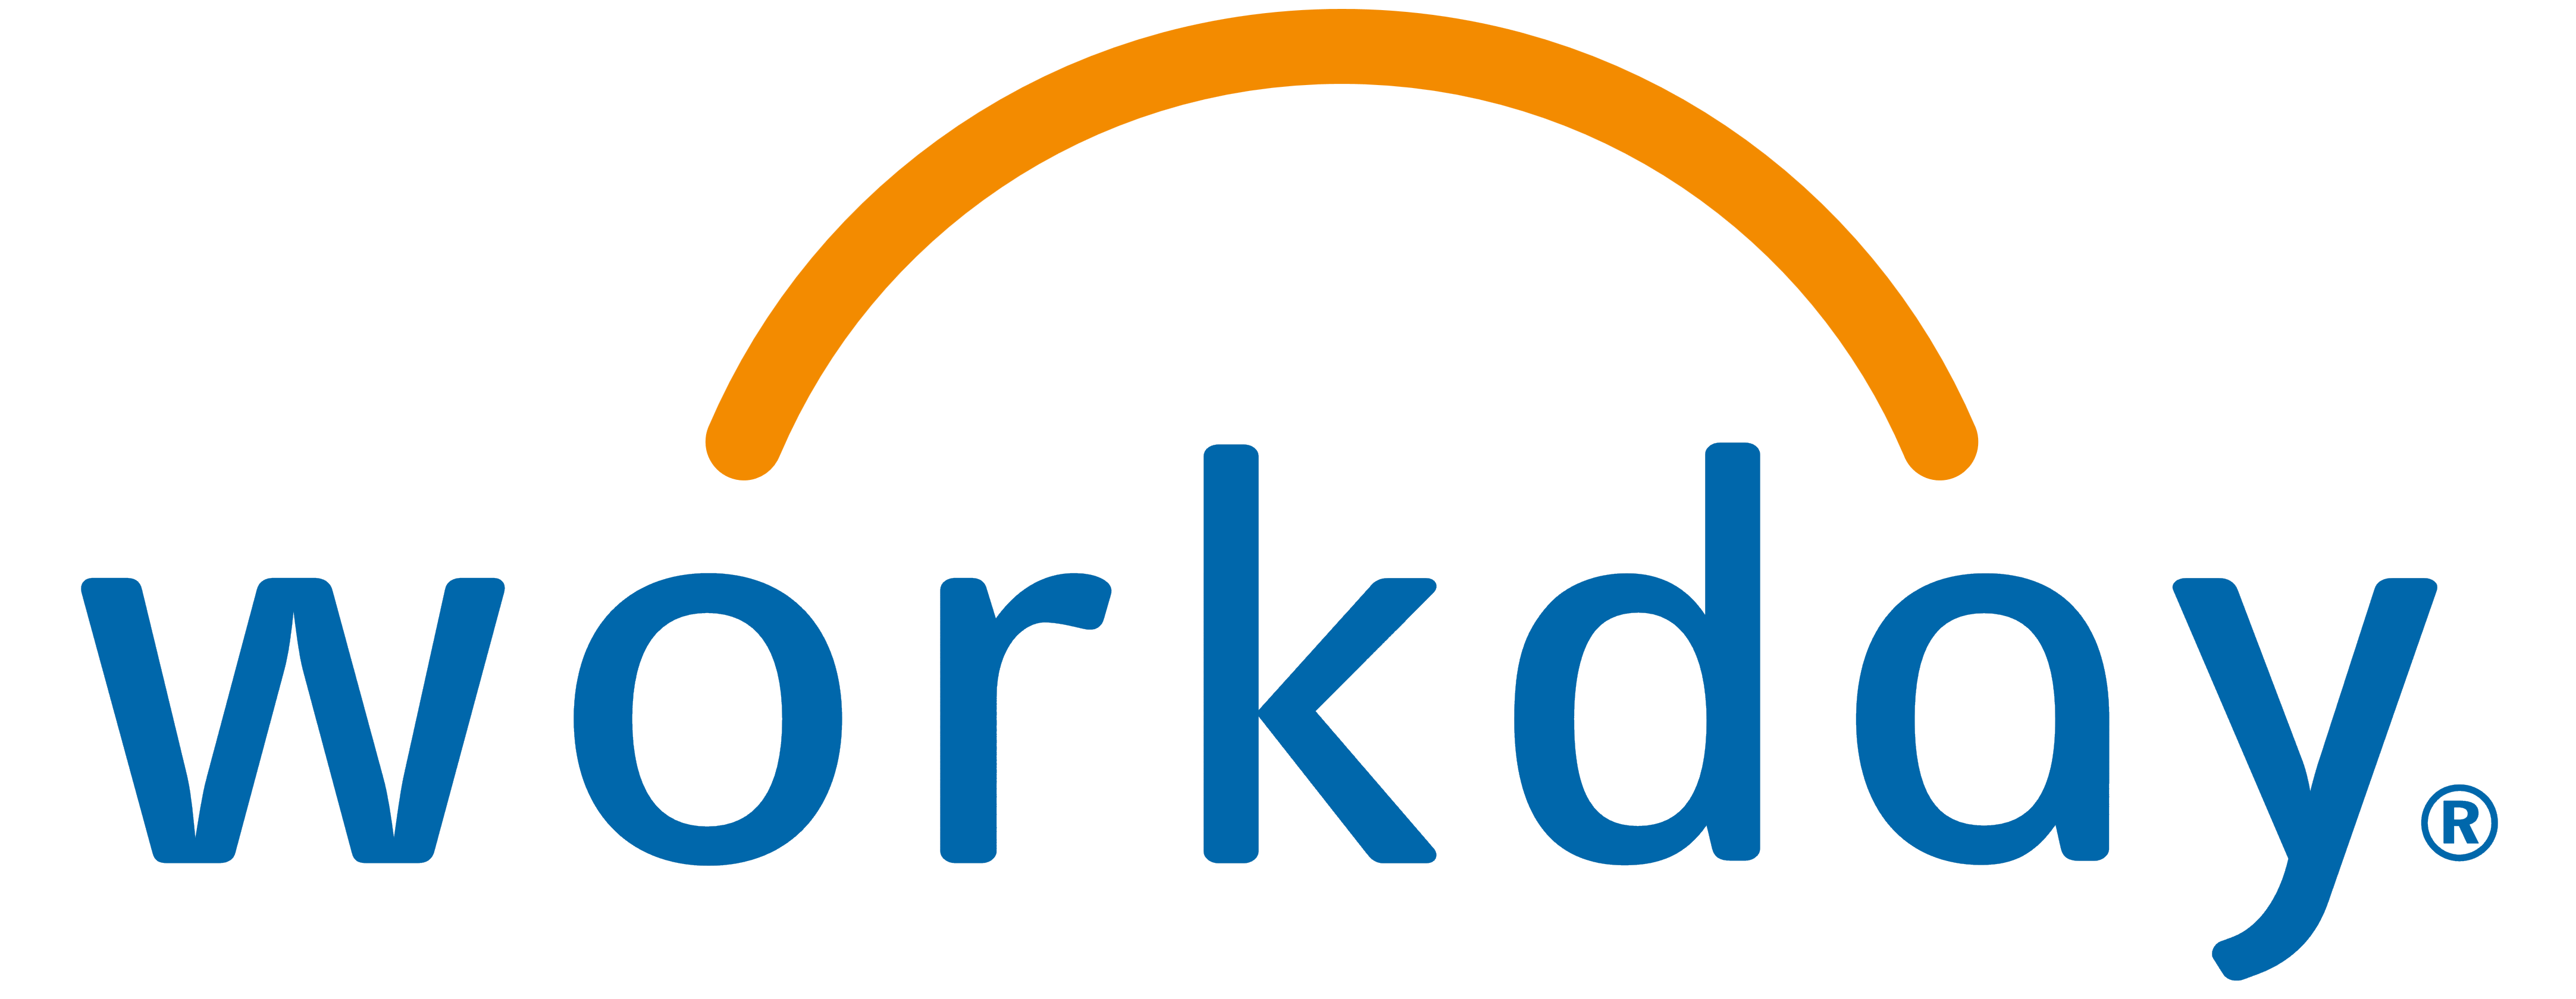 Paramount Consulting offers Workday Human Resources software setup and training for businesses of all sizes.